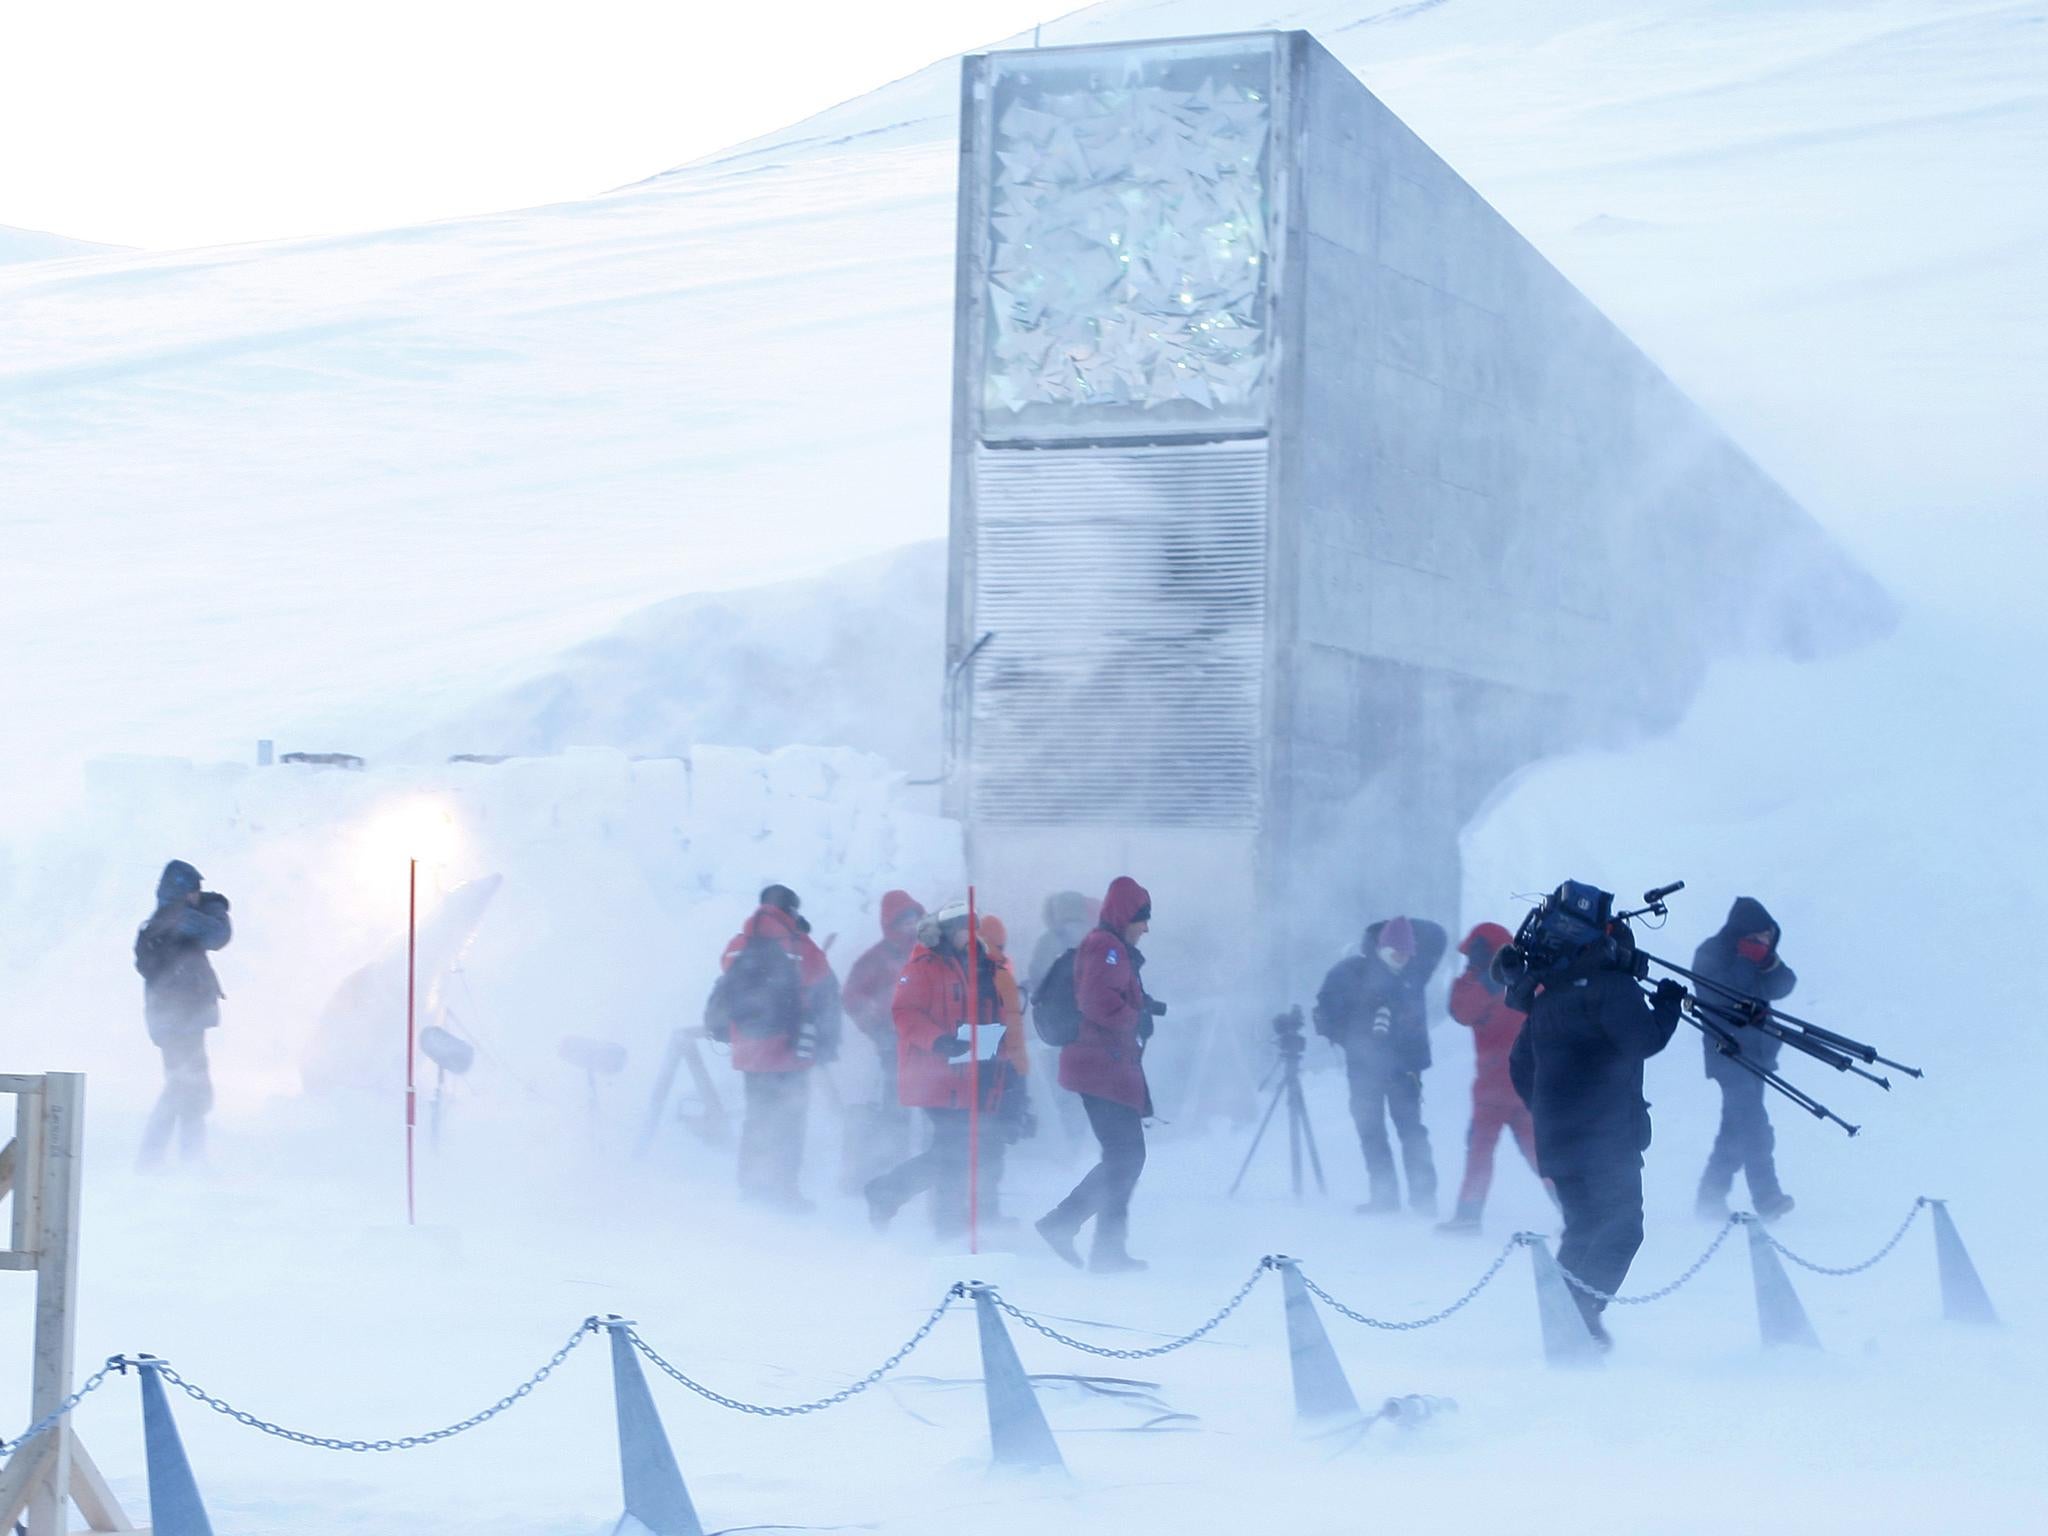 Journalists and cameramen walk under a gust of cold wind near the entrance of the Svalbard Global Seed Vault that was officially opened near Longyearbyen on February 26, 2008